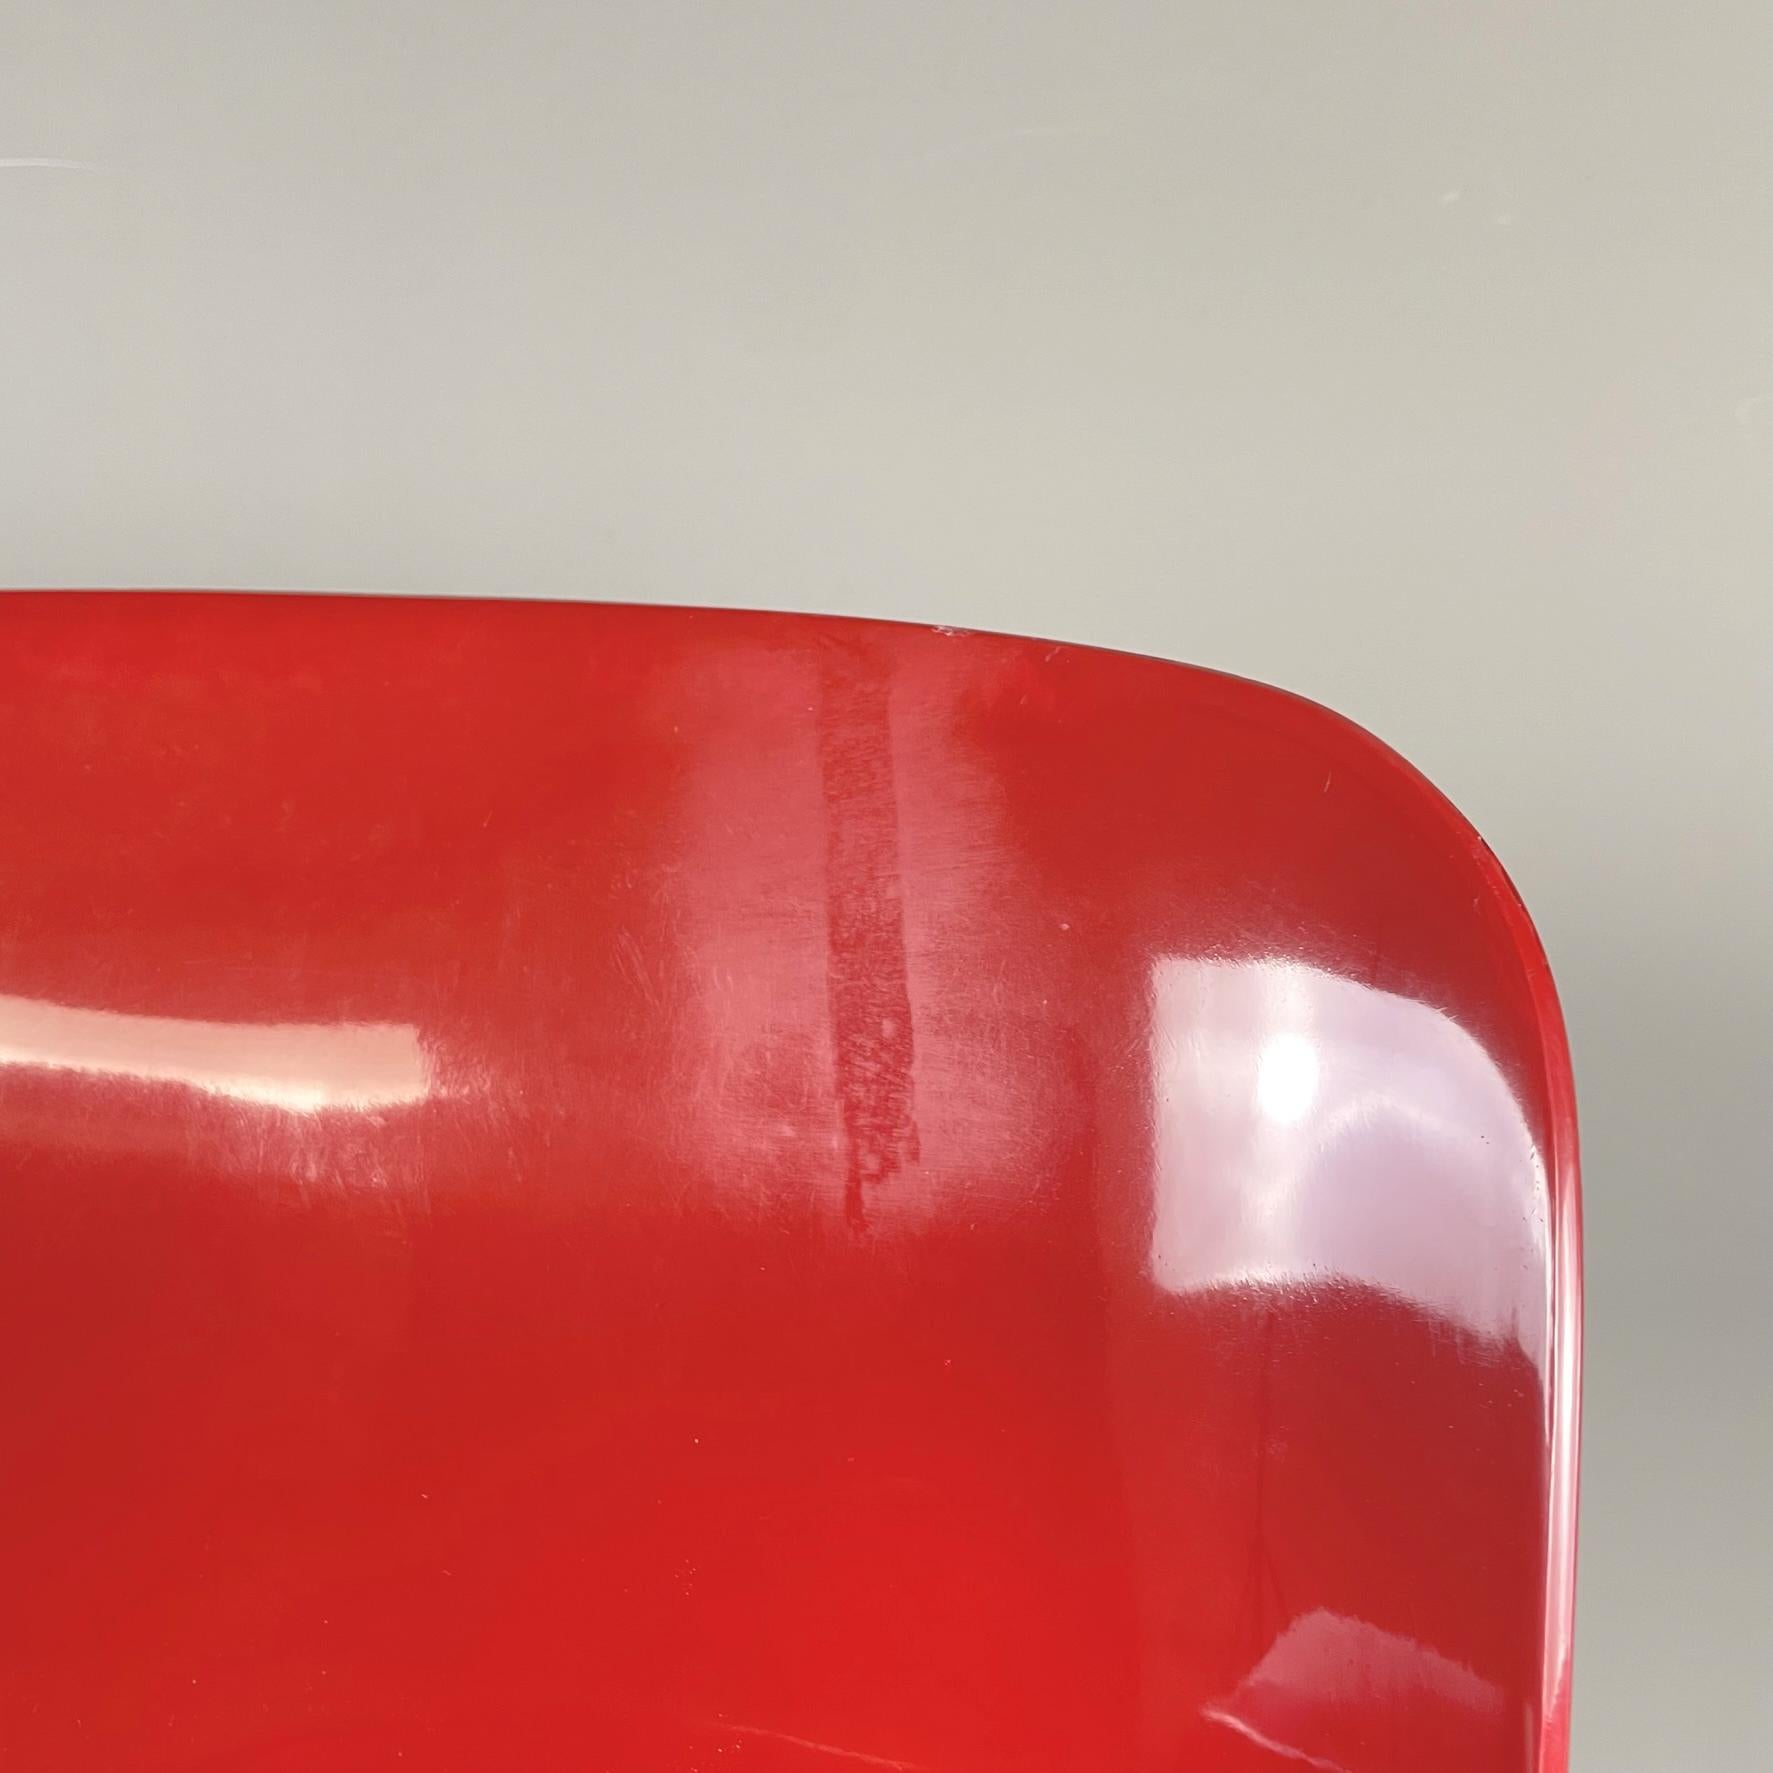 Italian modern plastic red Chairs Selene by Vico Magistretti for Artemide, 1960s For Sale 12